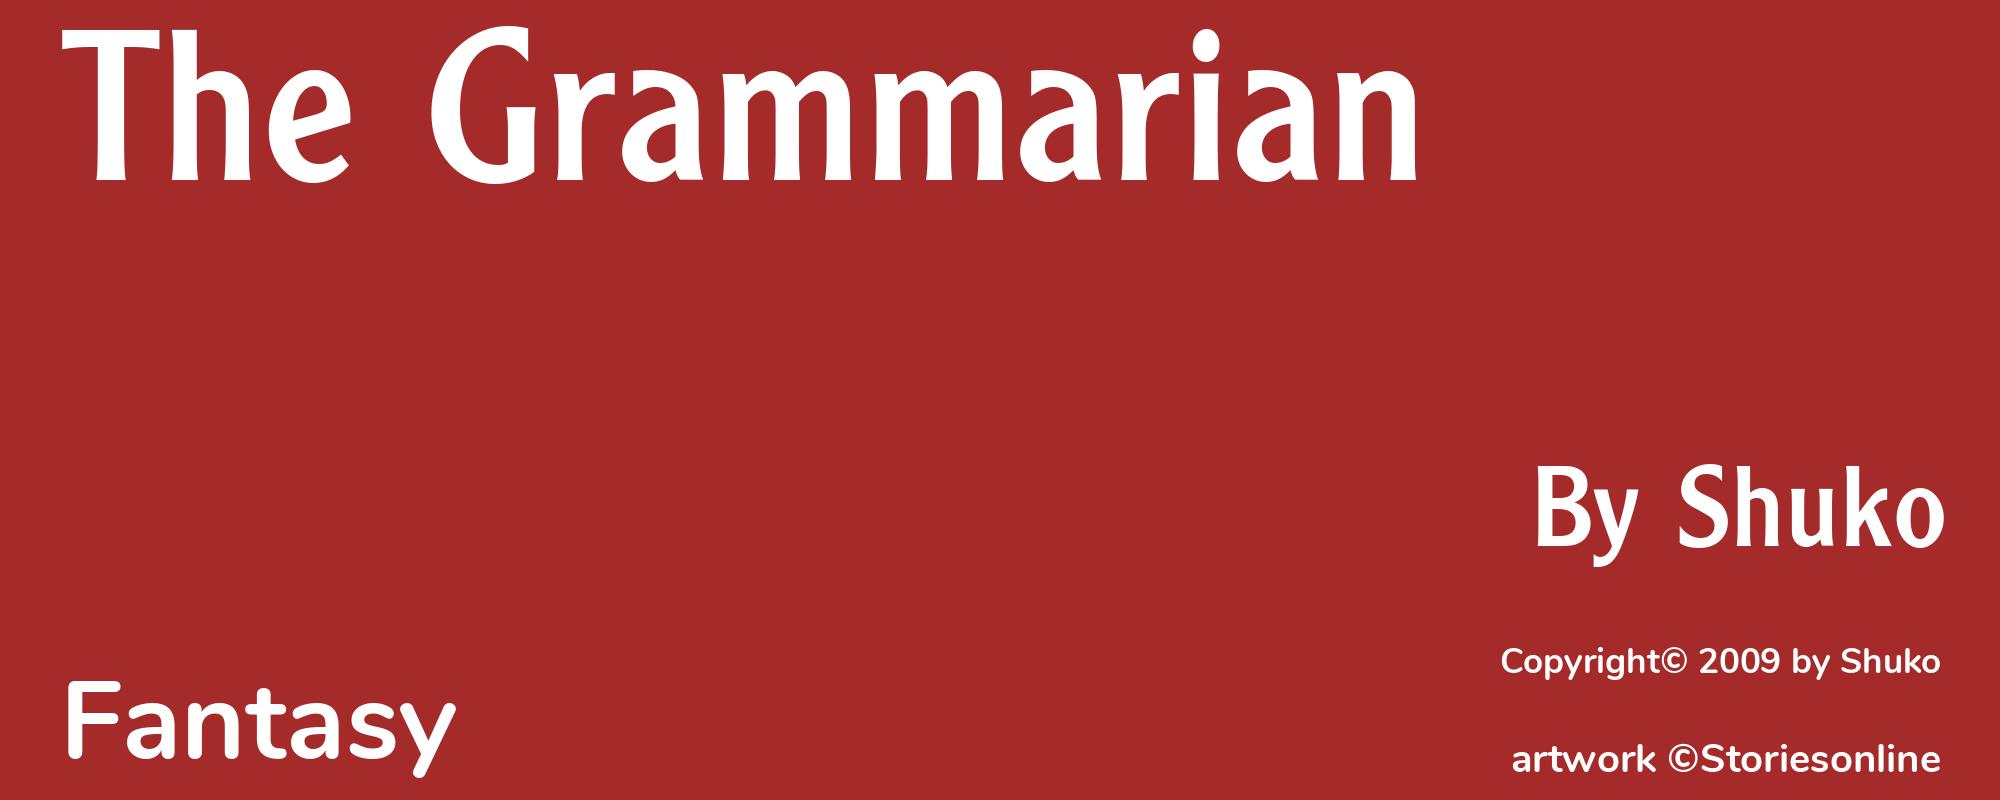 The Grammarian - Cover